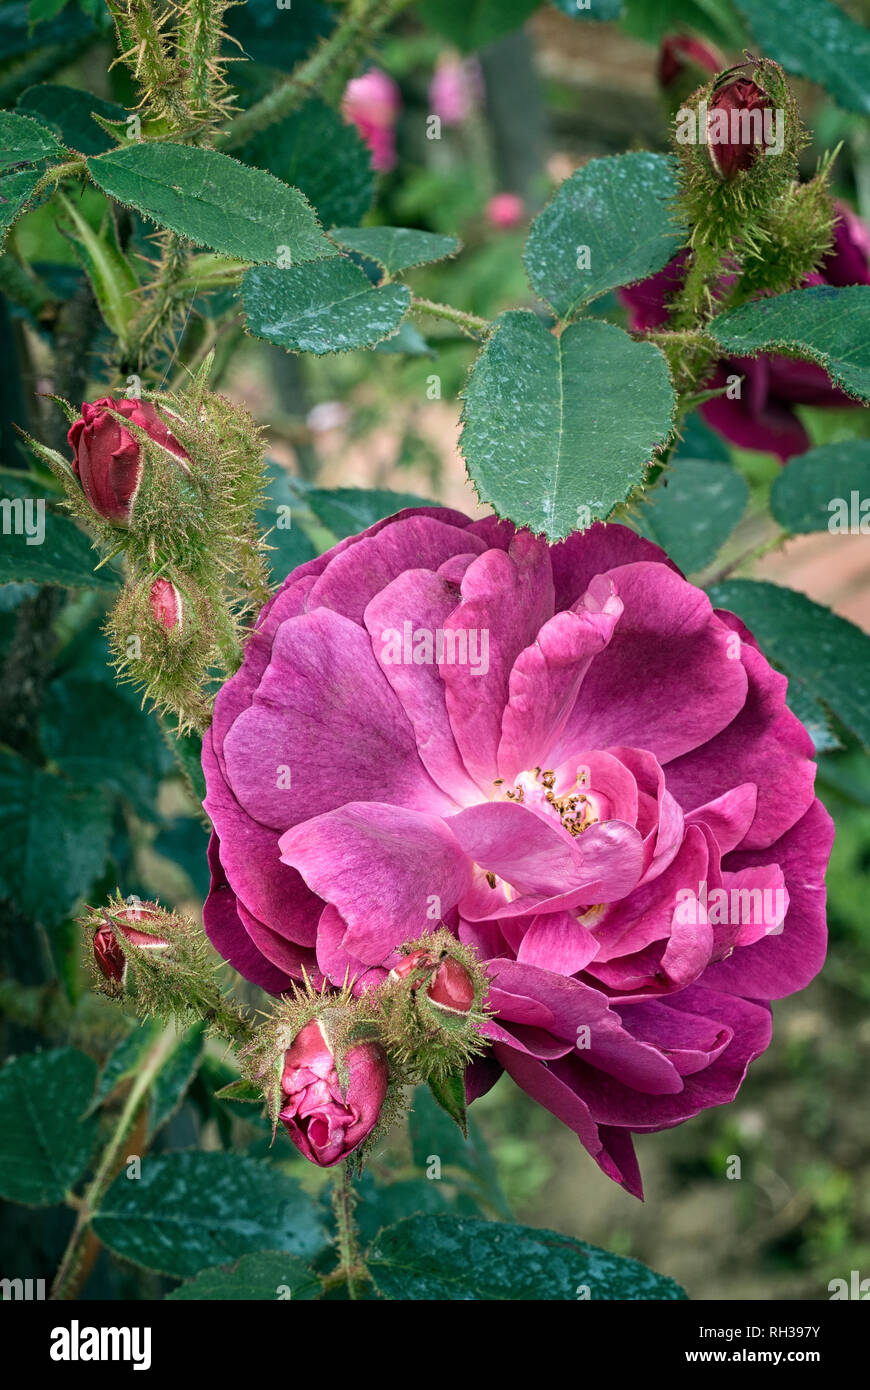 Rosa cv. Old Red Moss; Rosaceae; shurb; Moss; flower double Carmine-red. Other name Rosa centifolia f. muscosa rubra . Stock Photo